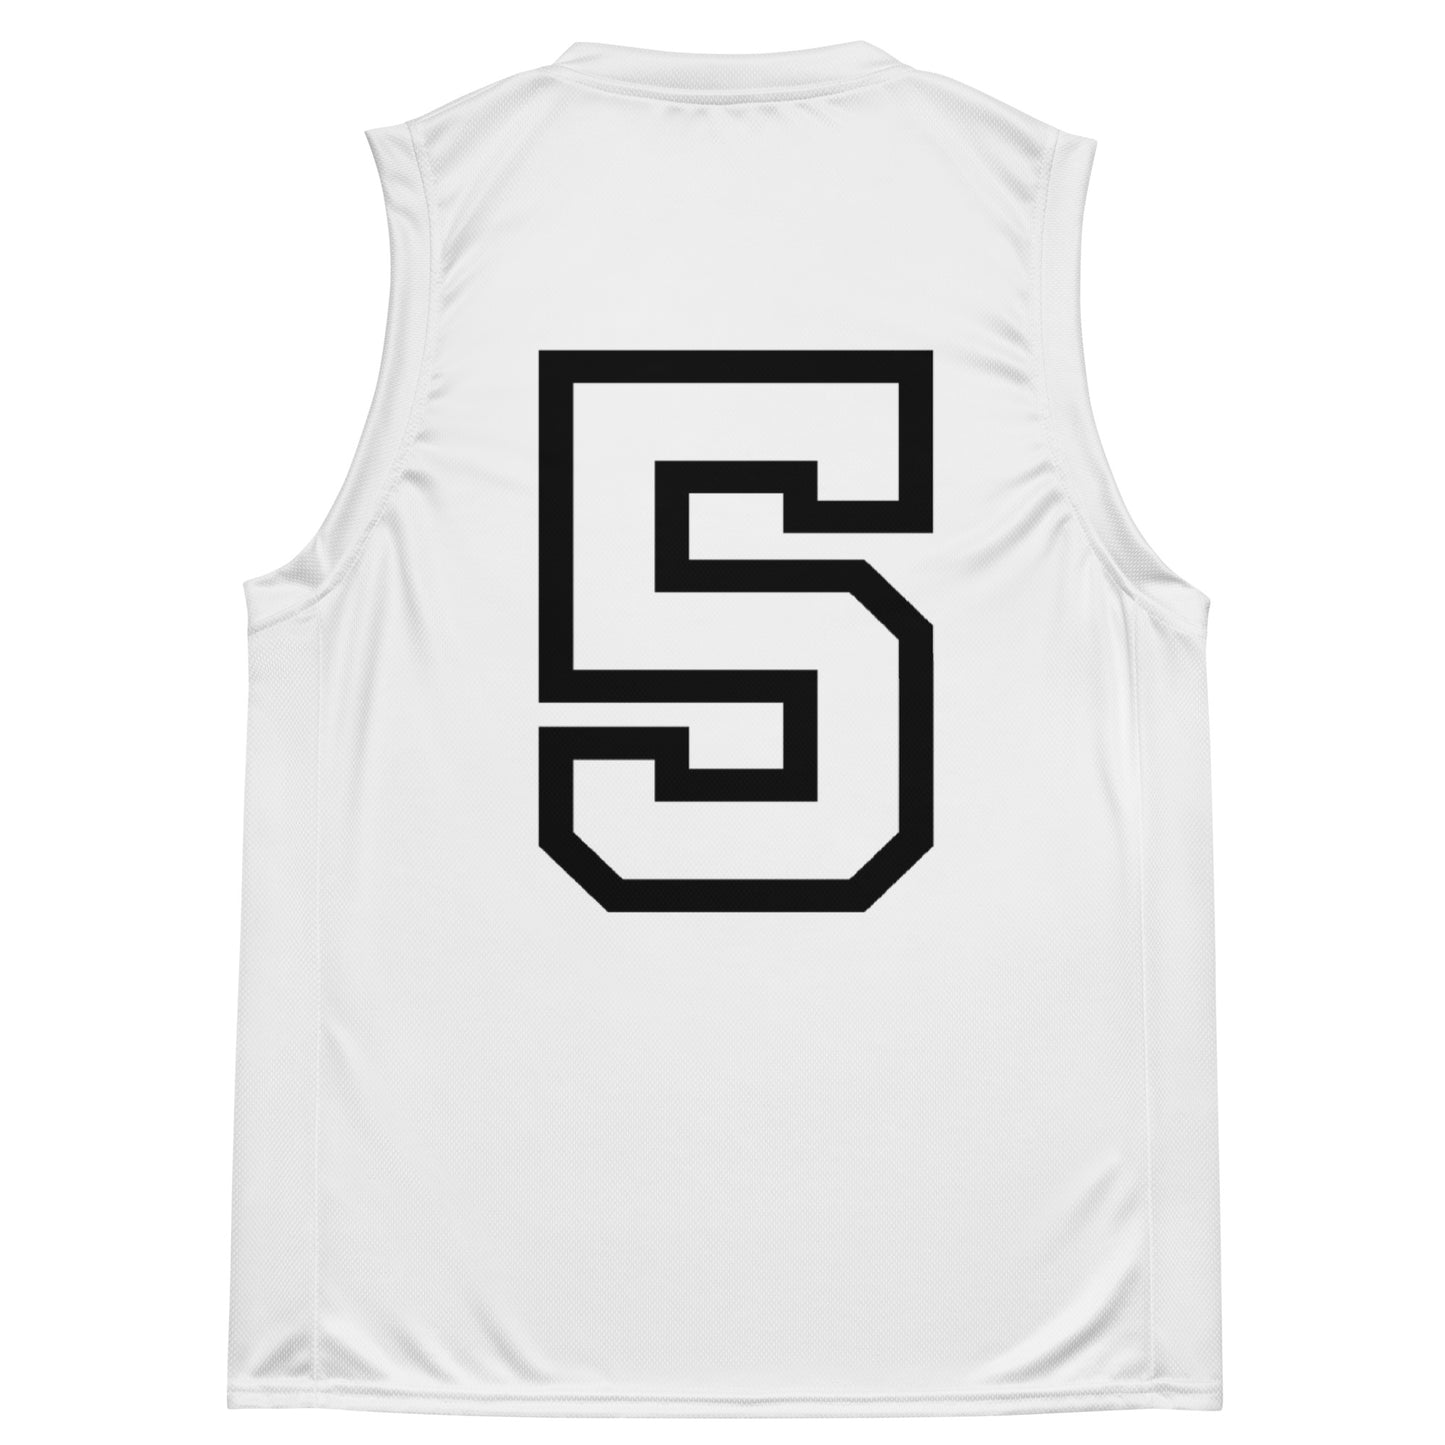 WSF (v6) Recycled unisex basketball jersey